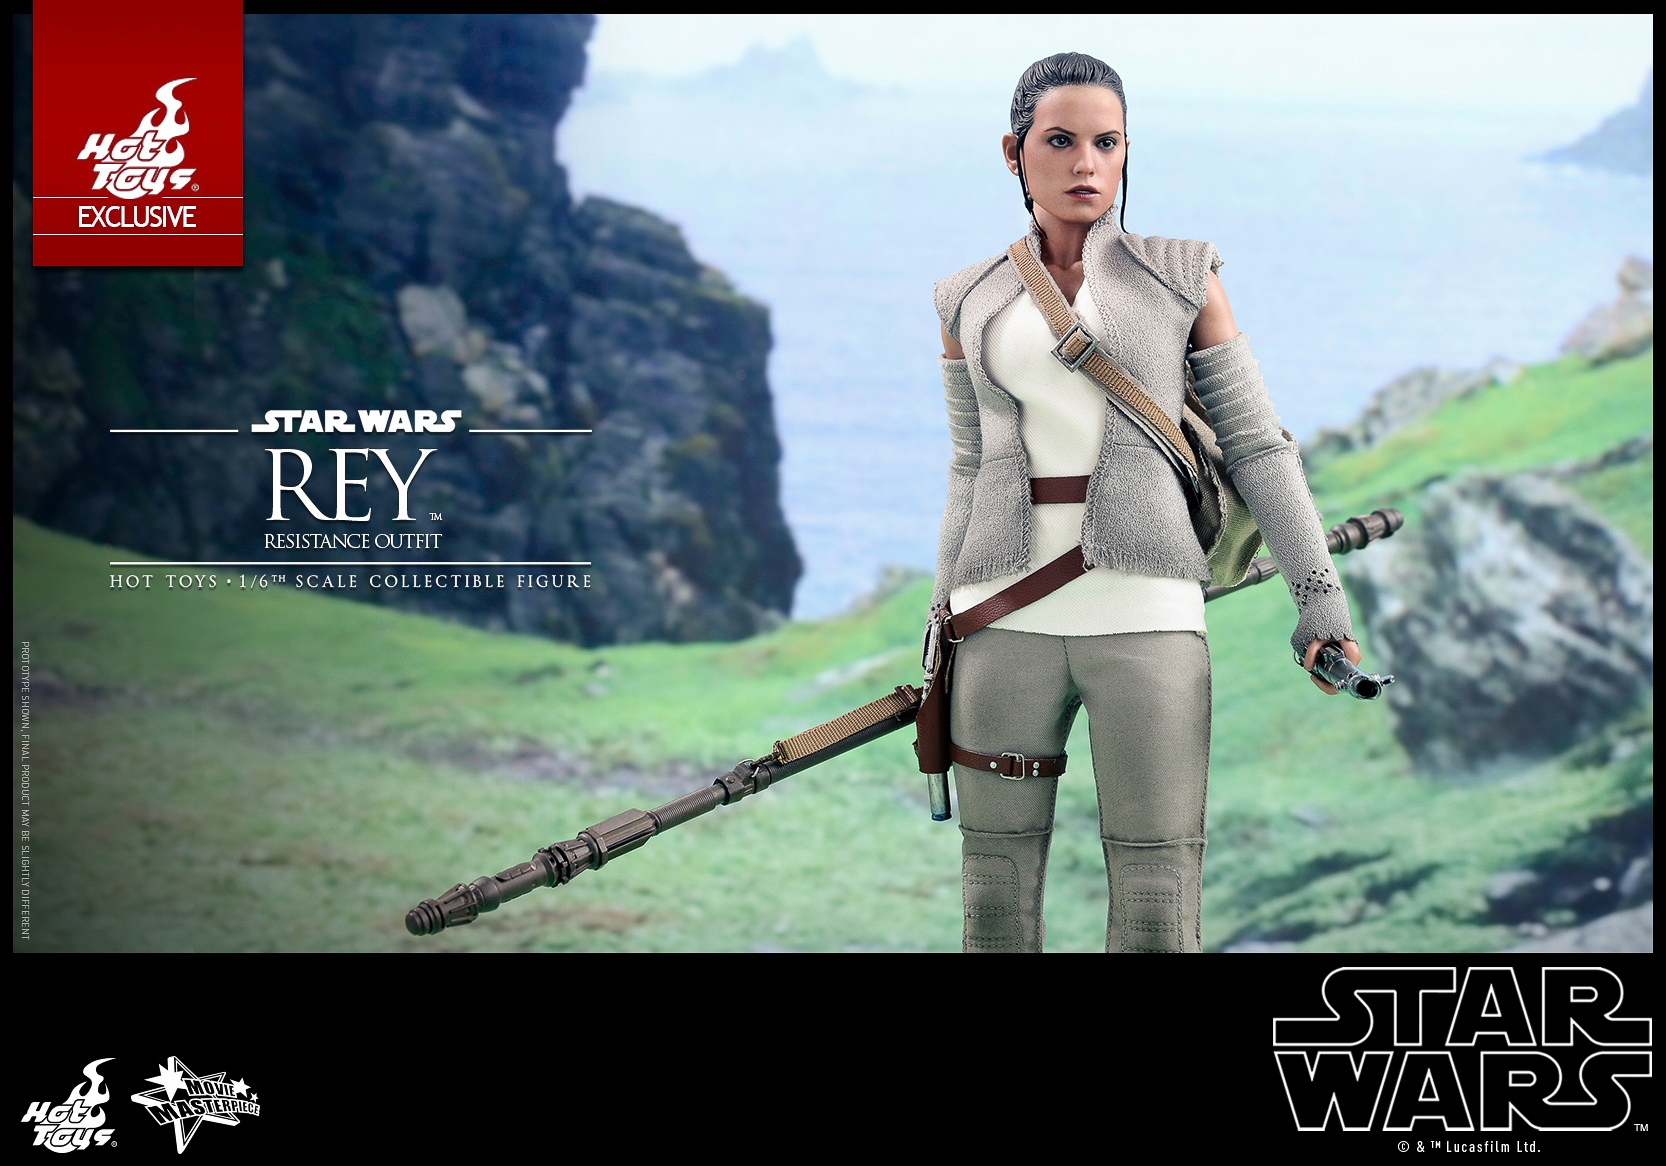 Hot-Toys-MMS377-The-Force-Awakens-Rey-Resistance-Outfit-005.jpg